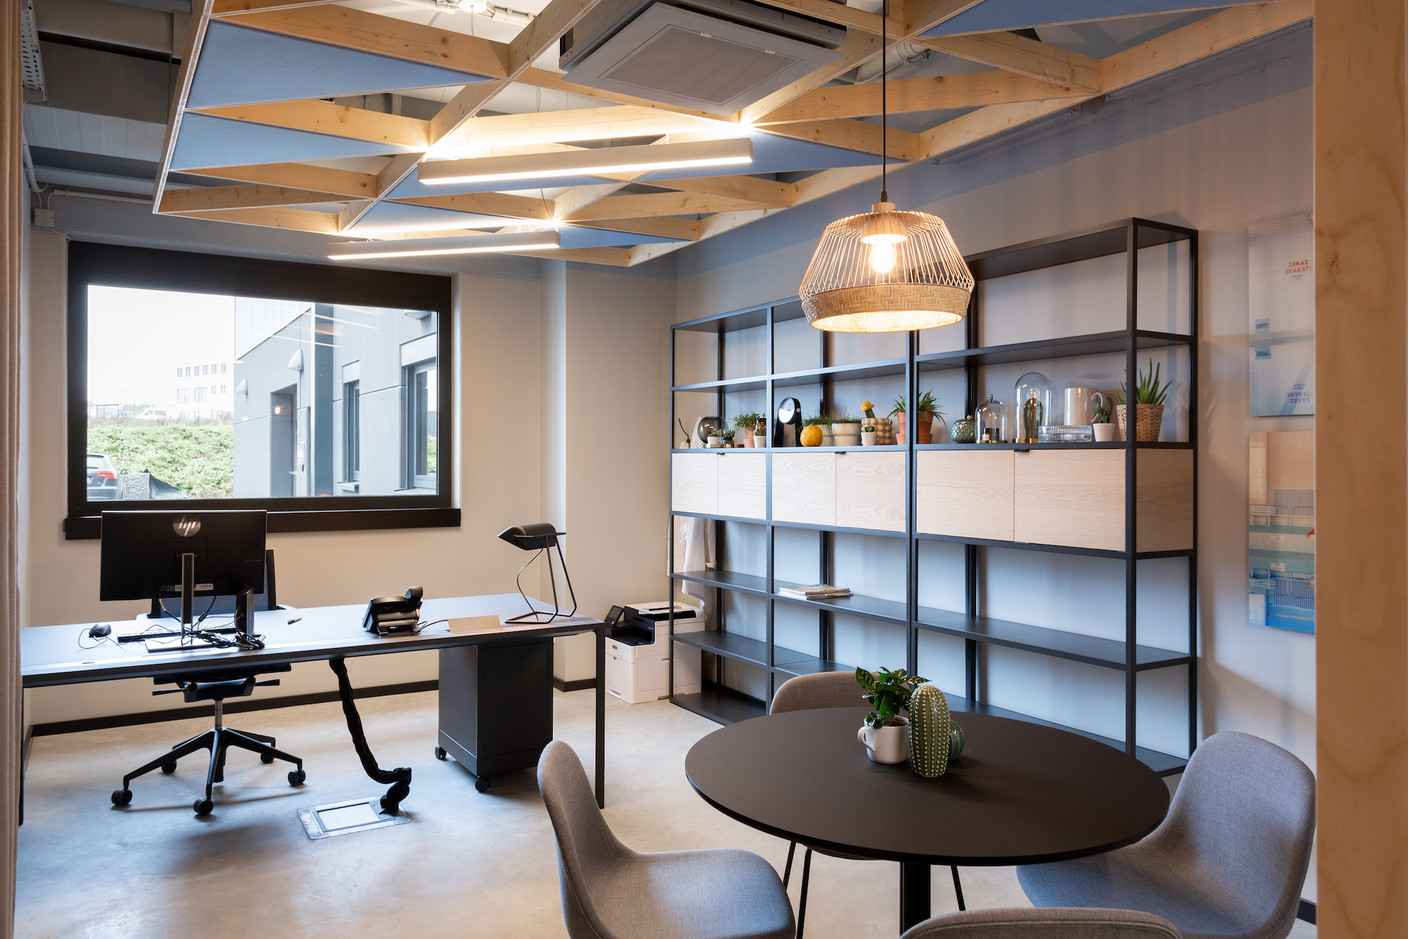 In the offices, false ceilings improve the acoustics and integrate the lighting. (Photo: Patty Neu)